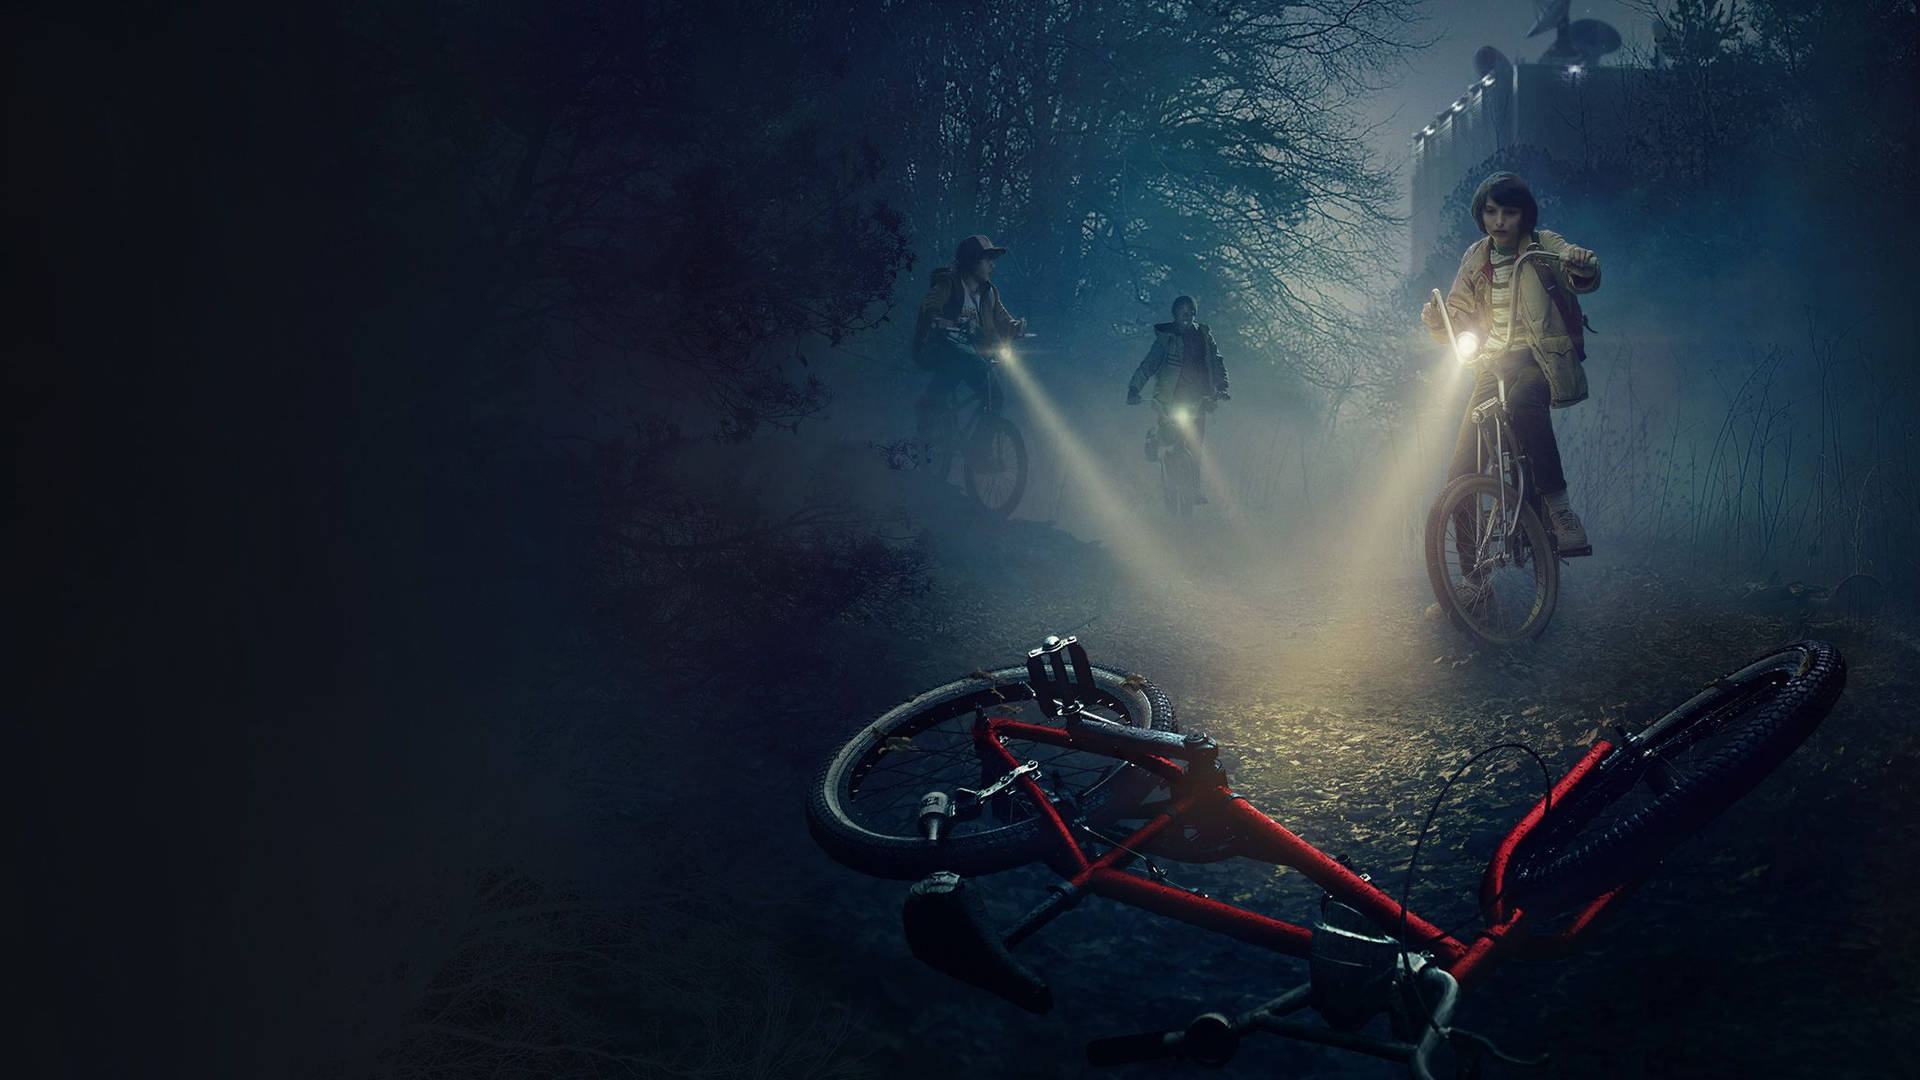 Will Byers' Bike Against The Unknown in Stranger Things Wallpaper